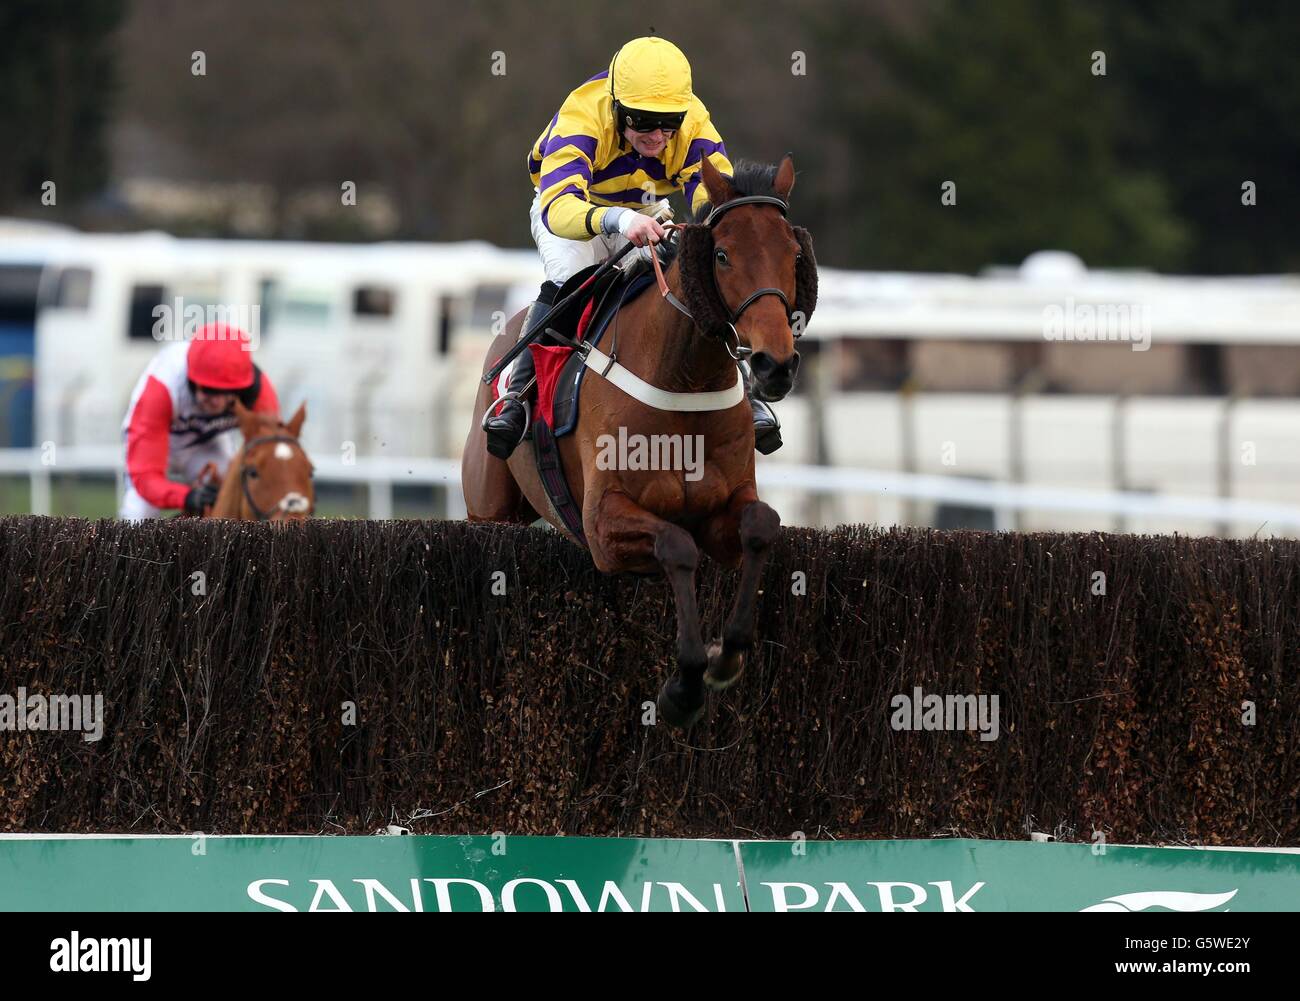 Pistol riden by Richard Johnson wins the London Southend Airport Juvenile Hurdle during Royal Artillery Gold Cup Day at Sandown Park Racecourse, Esher. Stock Photo